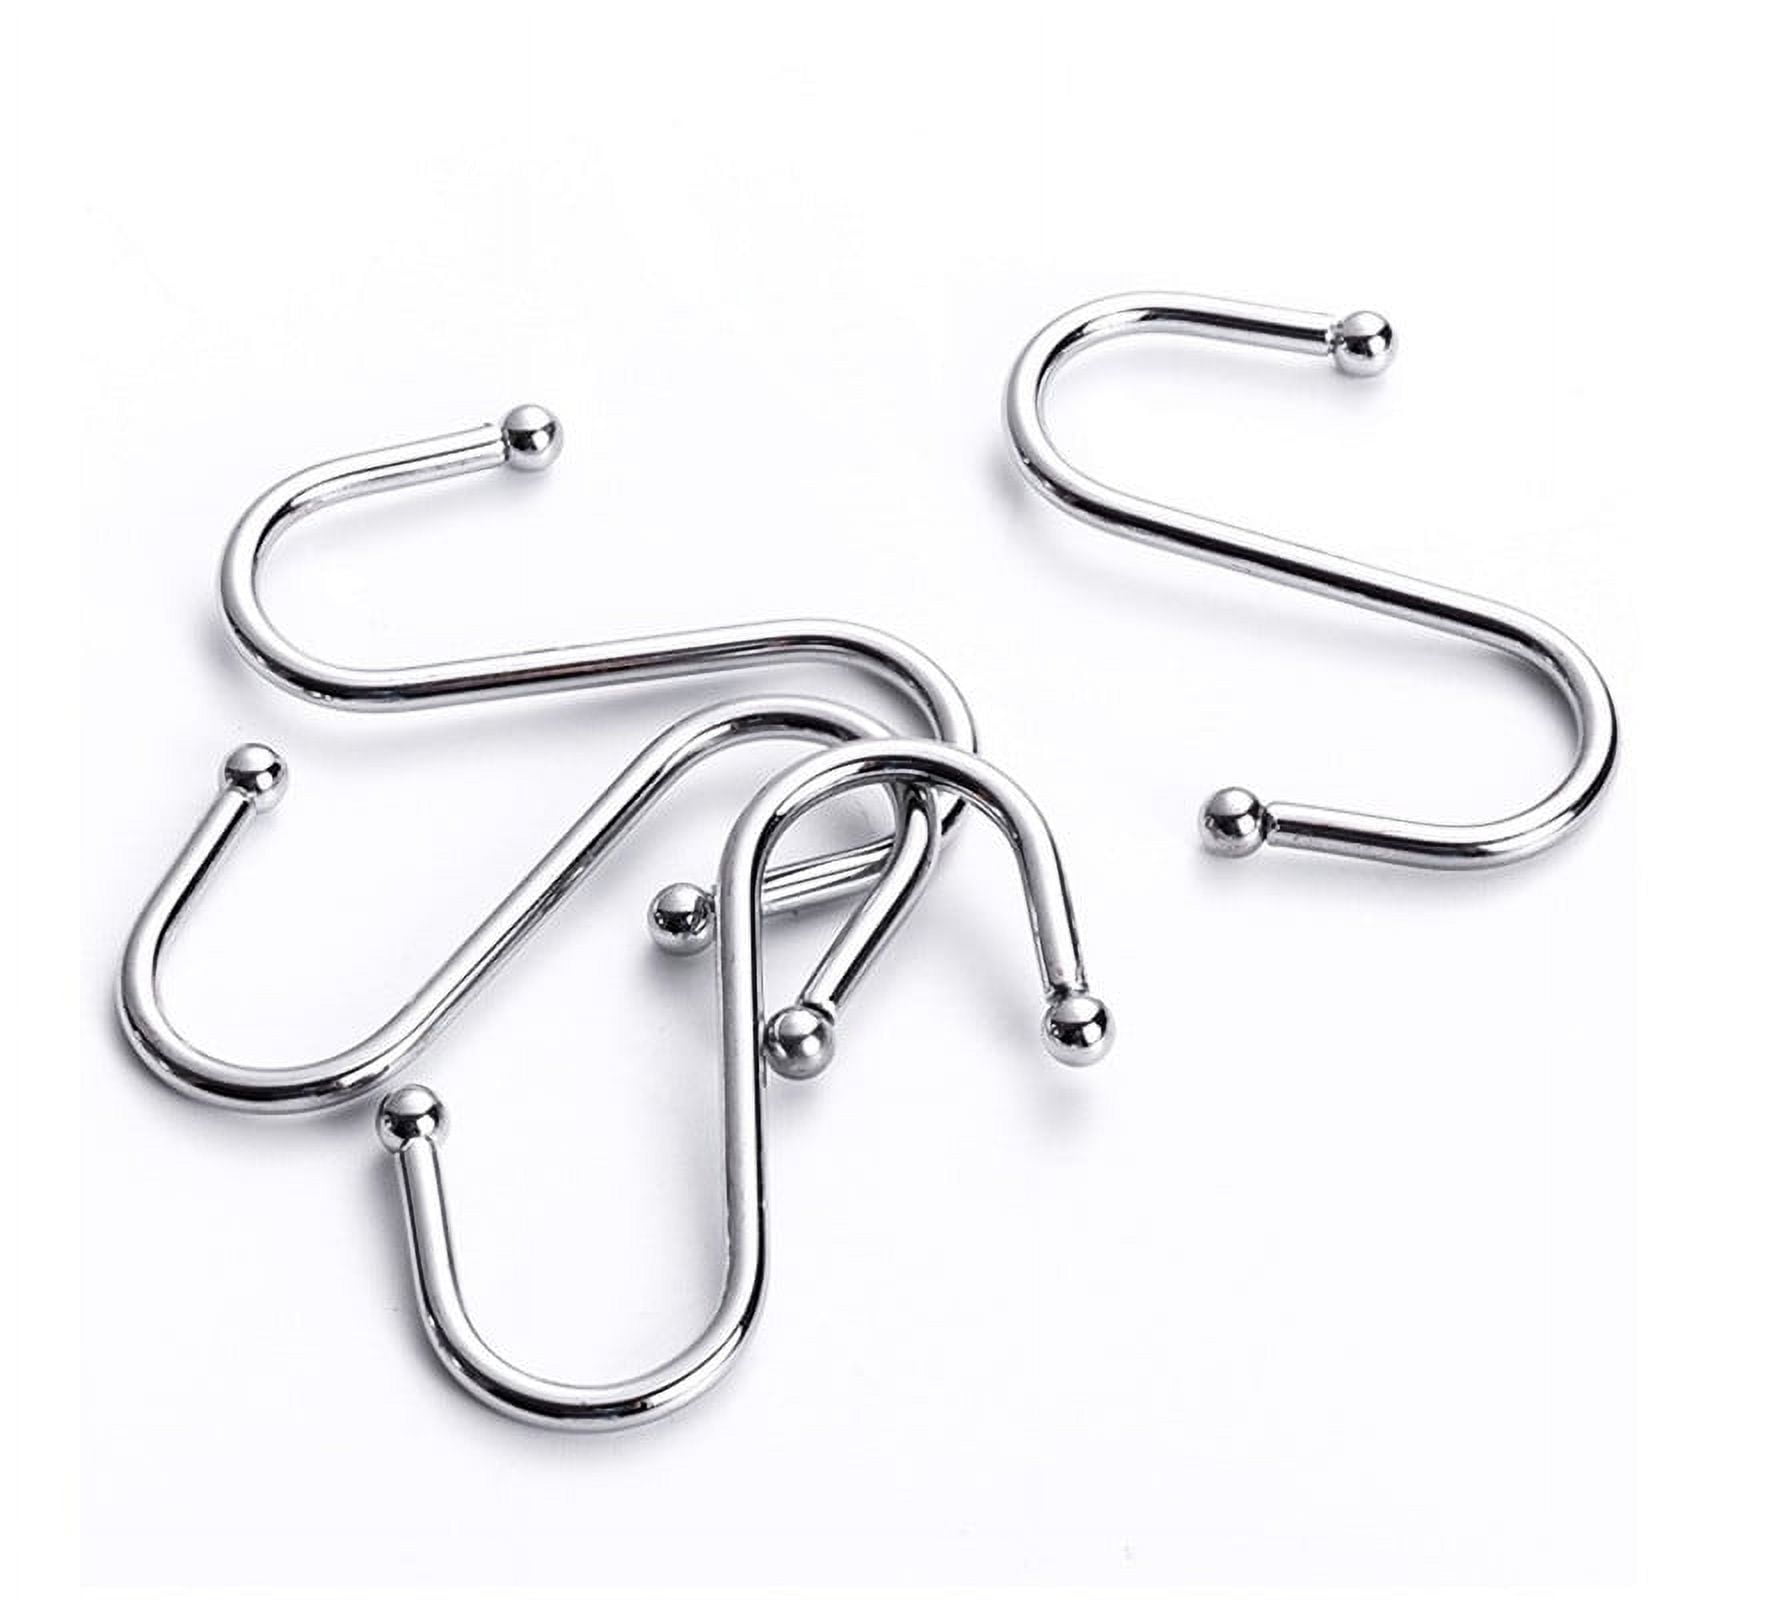 Happon 6 Pack S Hooks 3.15 Inch Silver, Heavy Duty Metal S Shaped Hook, S  Hook for Hanging Items, Suitable for Garage, Office Garden, Kitchen,  Bathroom 